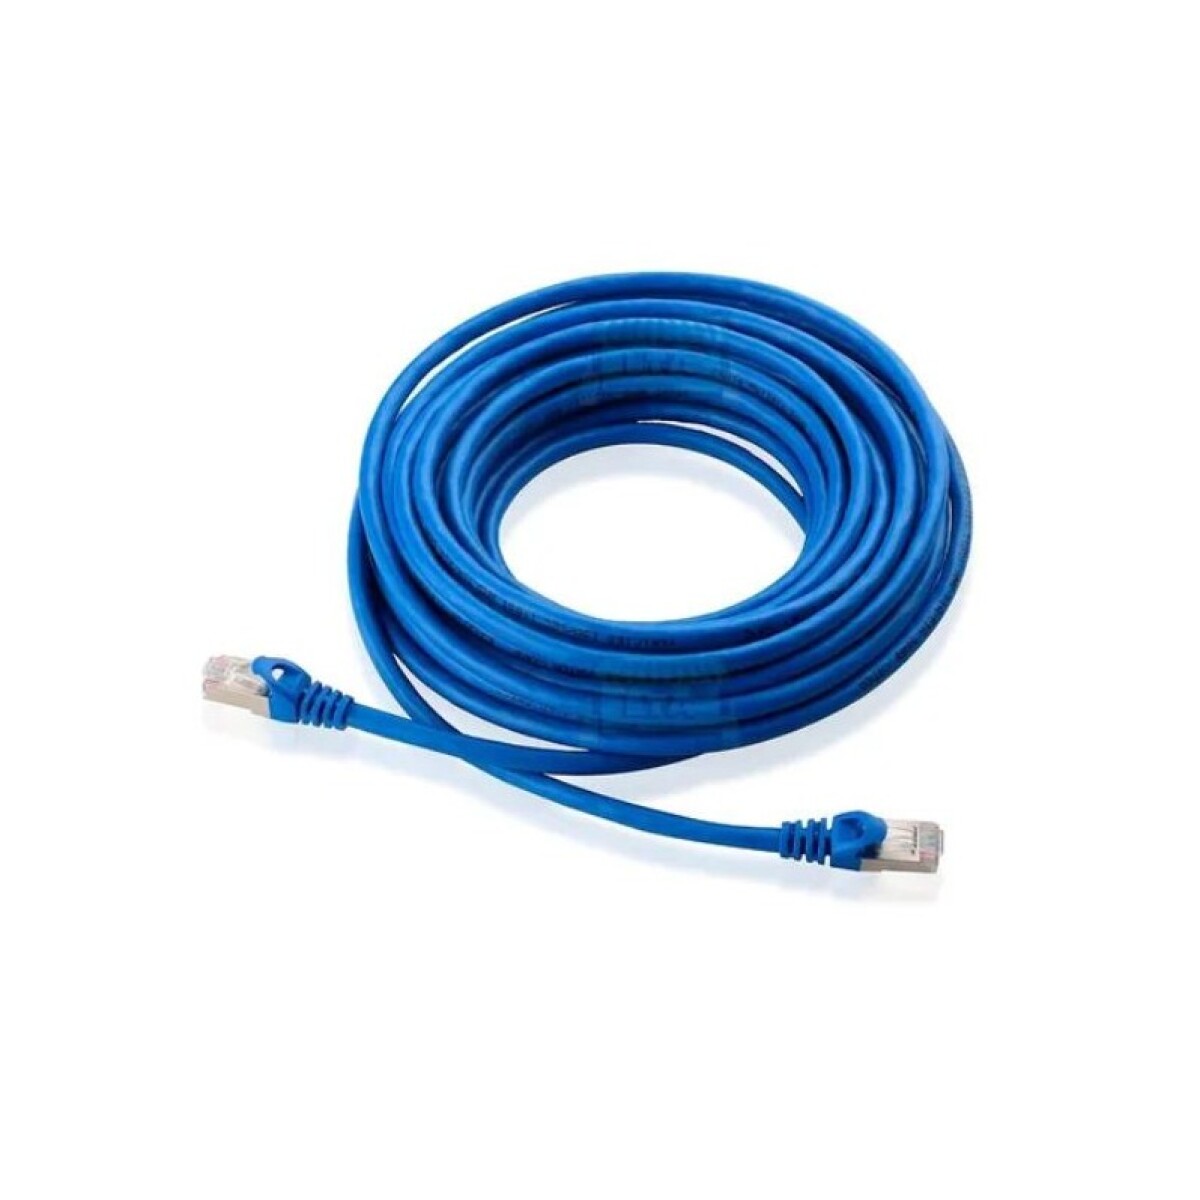 CABLE DE RED 5 MTS 